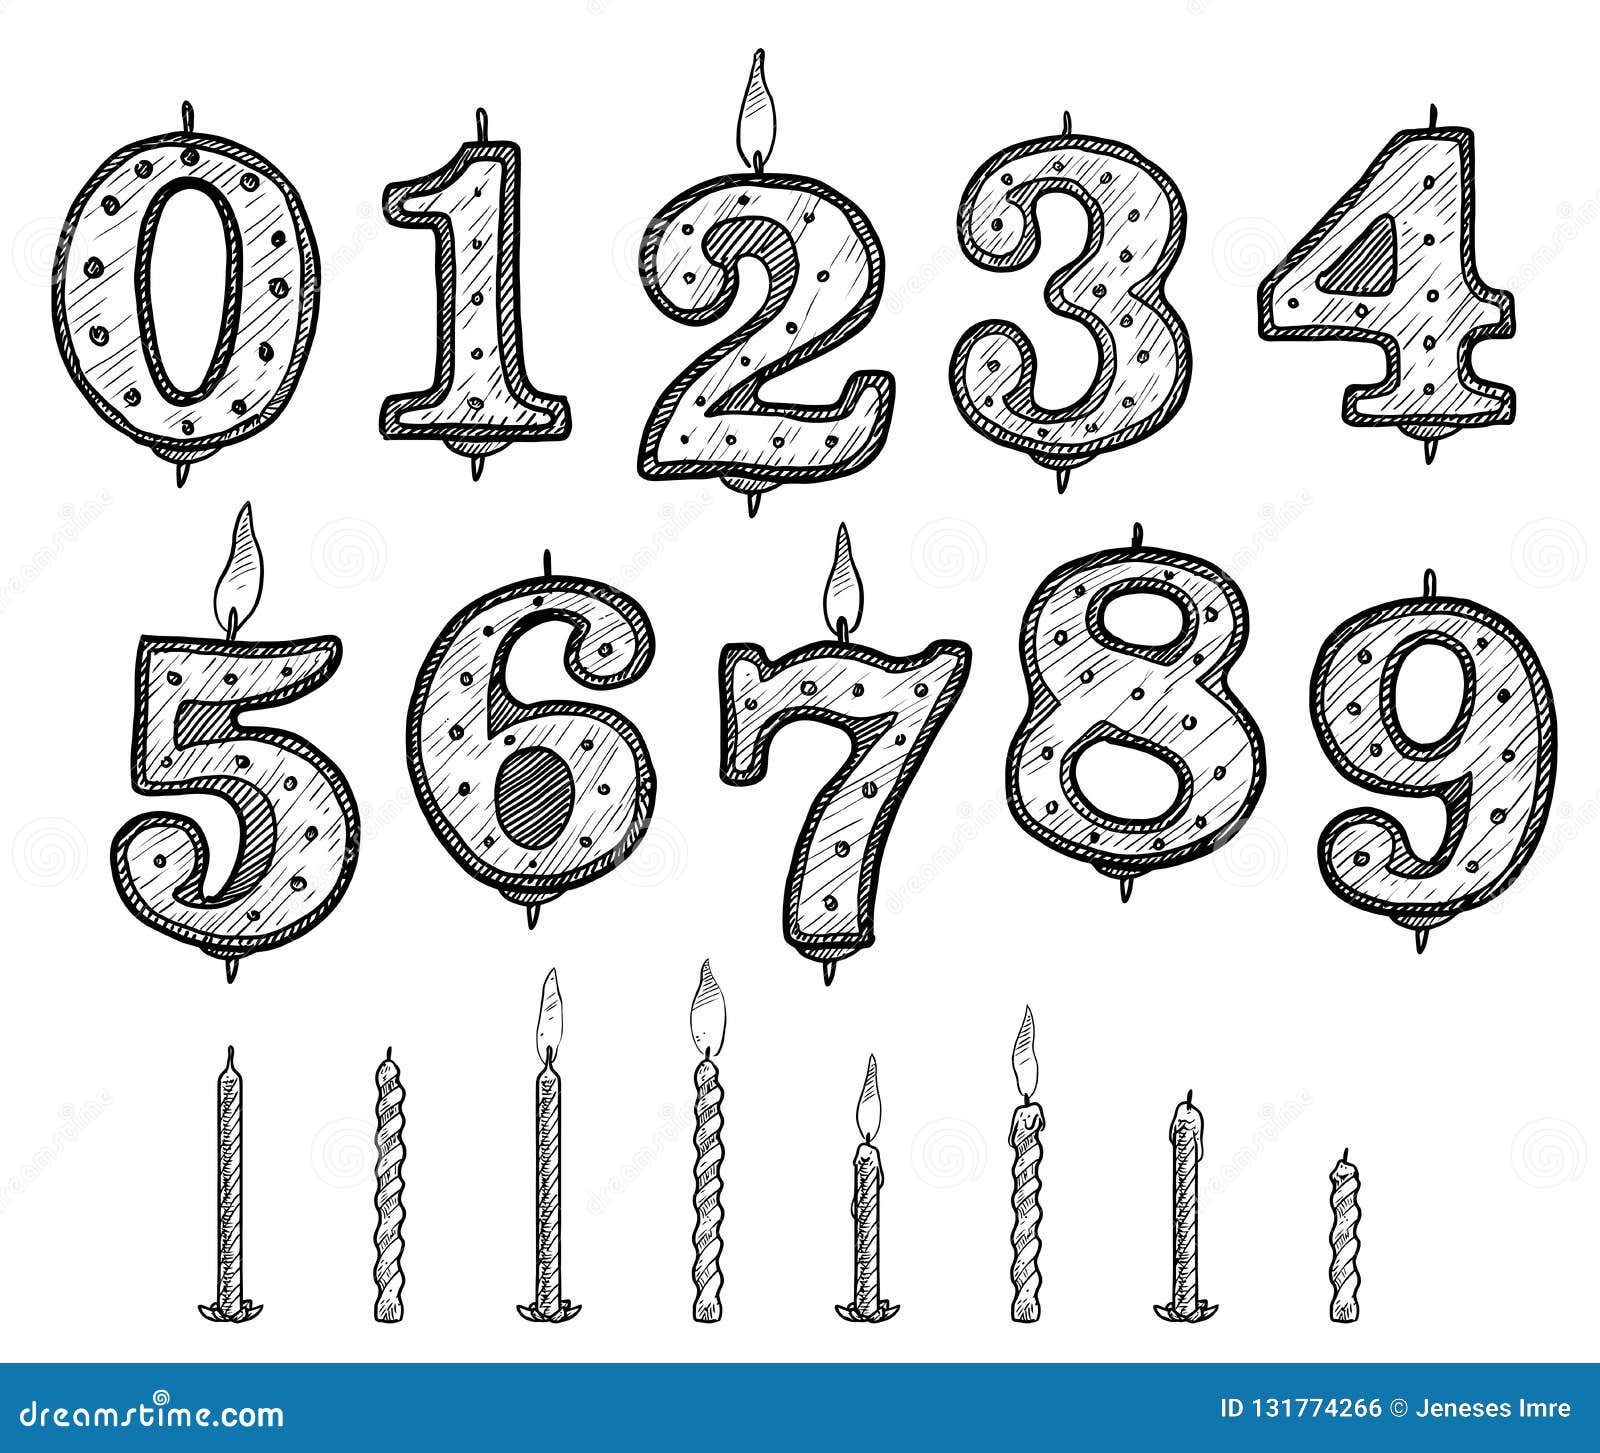 Birthday Candle Illustration Drawing Engraving Ink Line Art Vector Stock Vector Illustration Of Graphic Fire